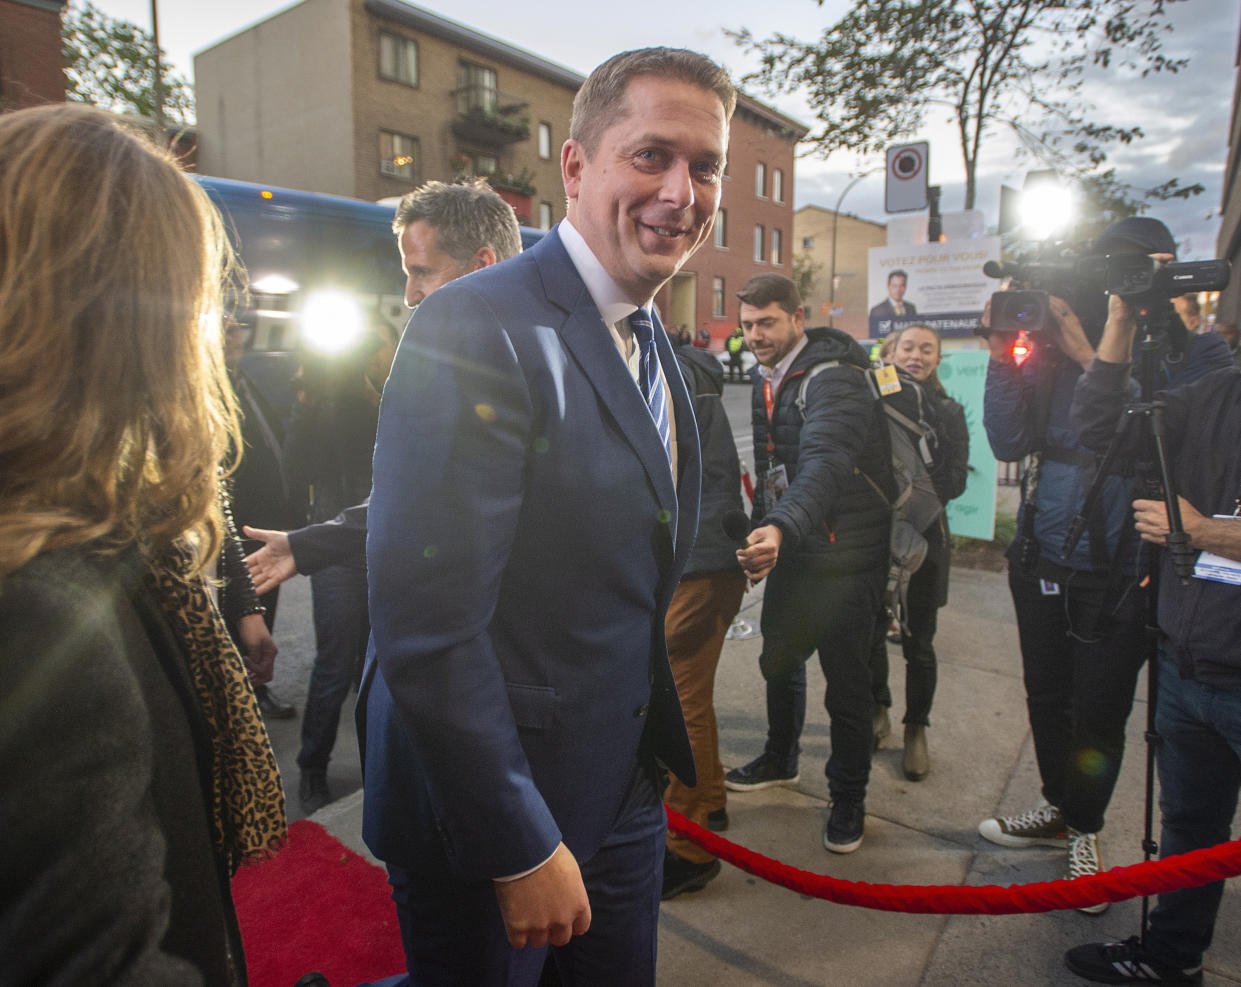 Conservative Leader Andrew Scheer arrives for the TVA French-language debate in Montreal, Wednesday, Oct. 2, 2019. (Ryan Remiorz/The Canadian Press via AP)